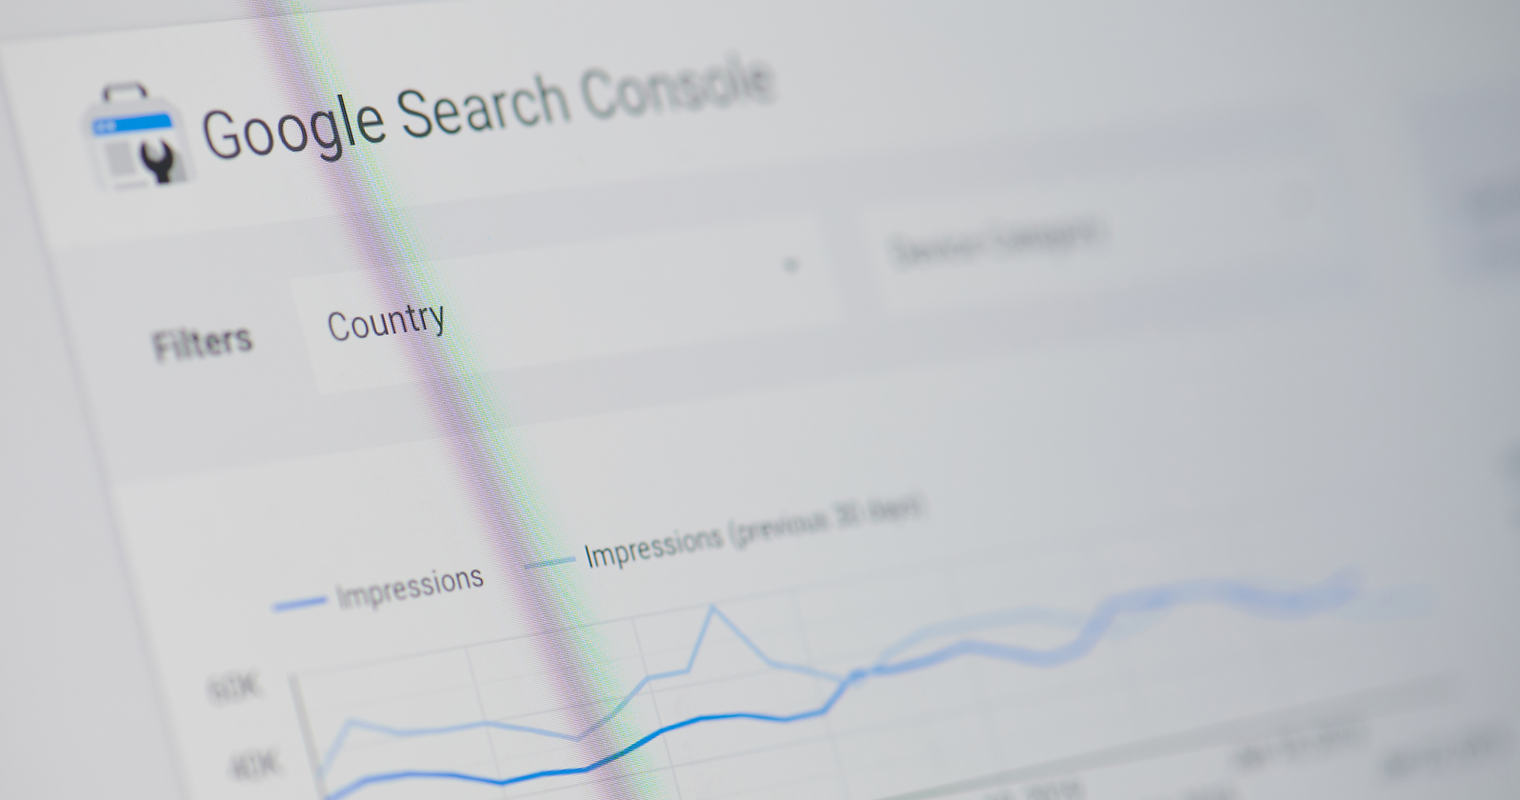 5 Top Crawl Stats Insights in Google Search Console